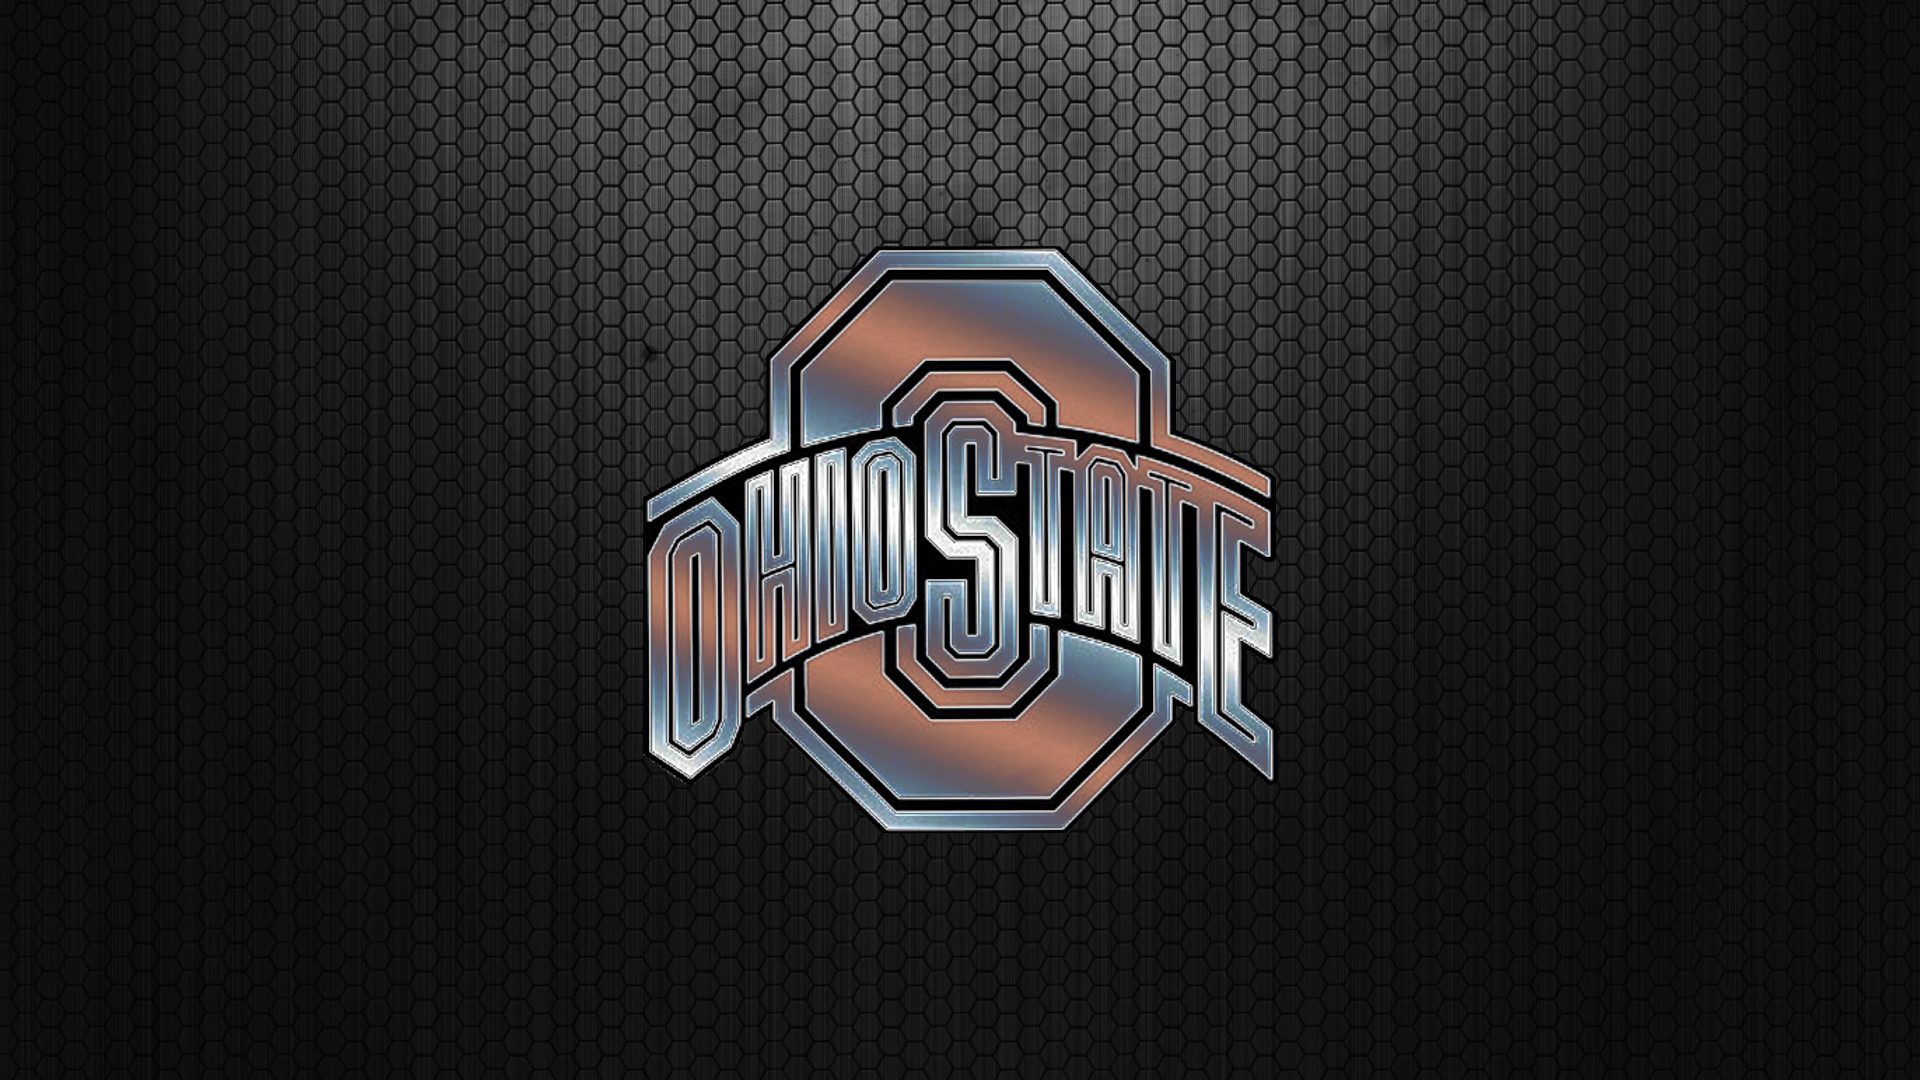 Football Osu Ohio State With Resolutions